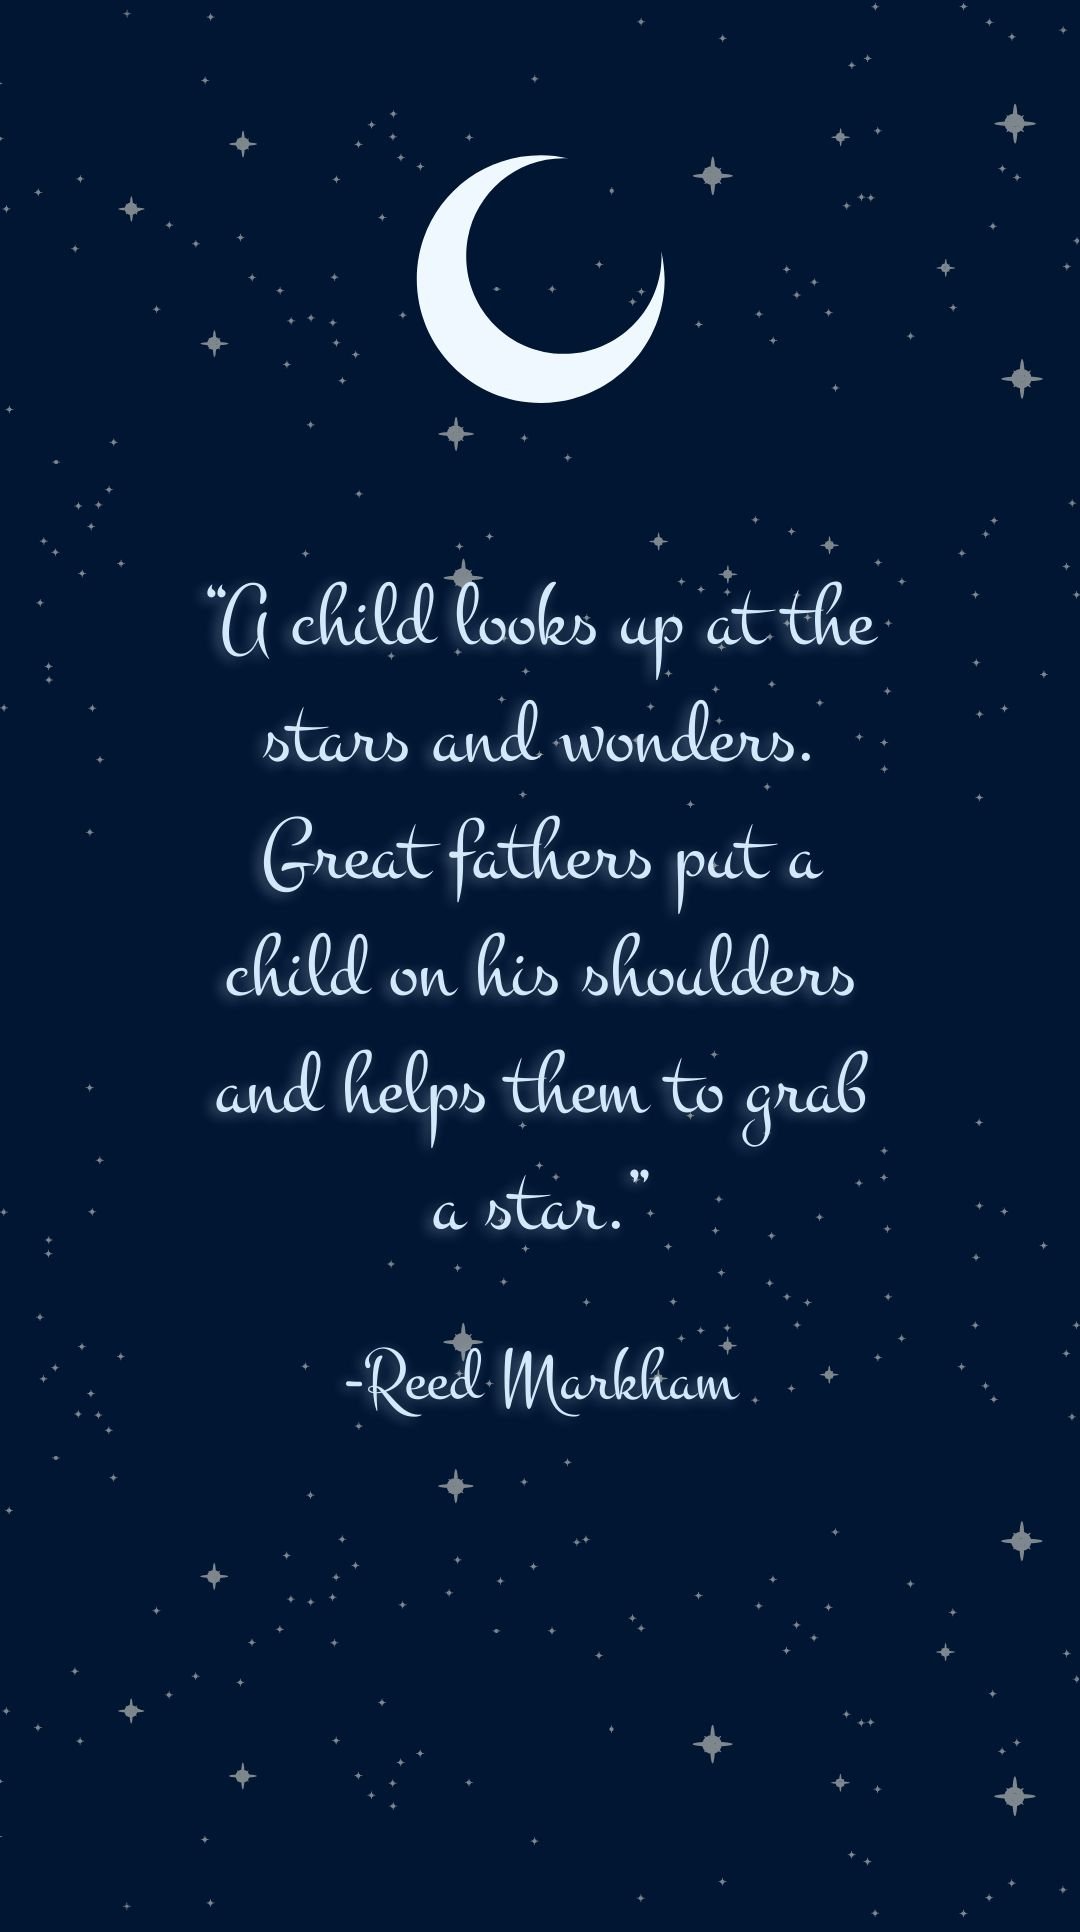 Reed Markham - A child looks up at the stars and wonders. Great fathers put a child on his shoulders and helps them to grab a star.